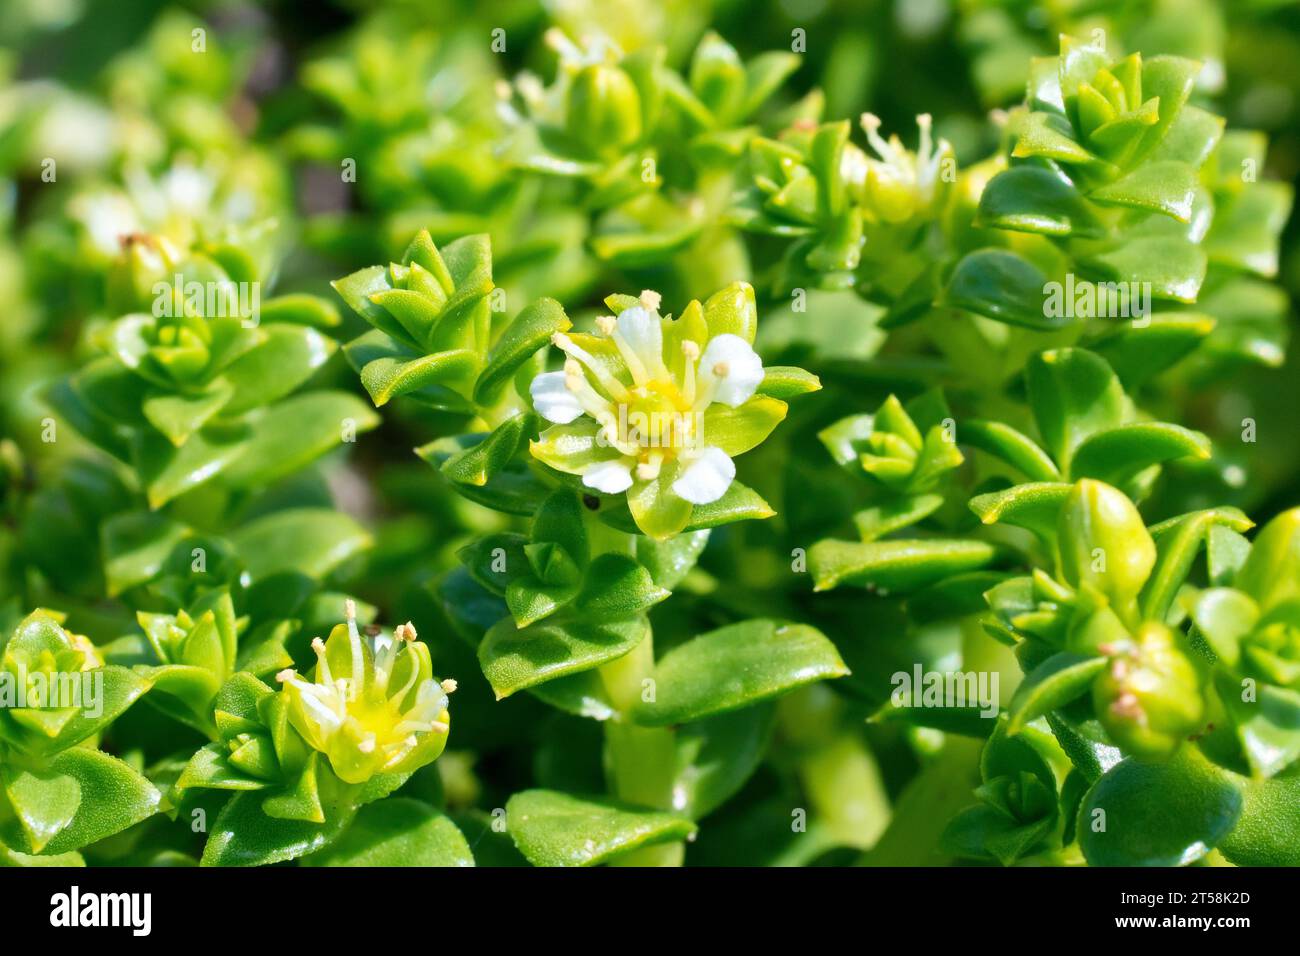 Sea Sandwort (honckenya peploides), close up showing the small white flower, stems and tightly packed leaves of this low-growing seaside succulent. Stock Photo